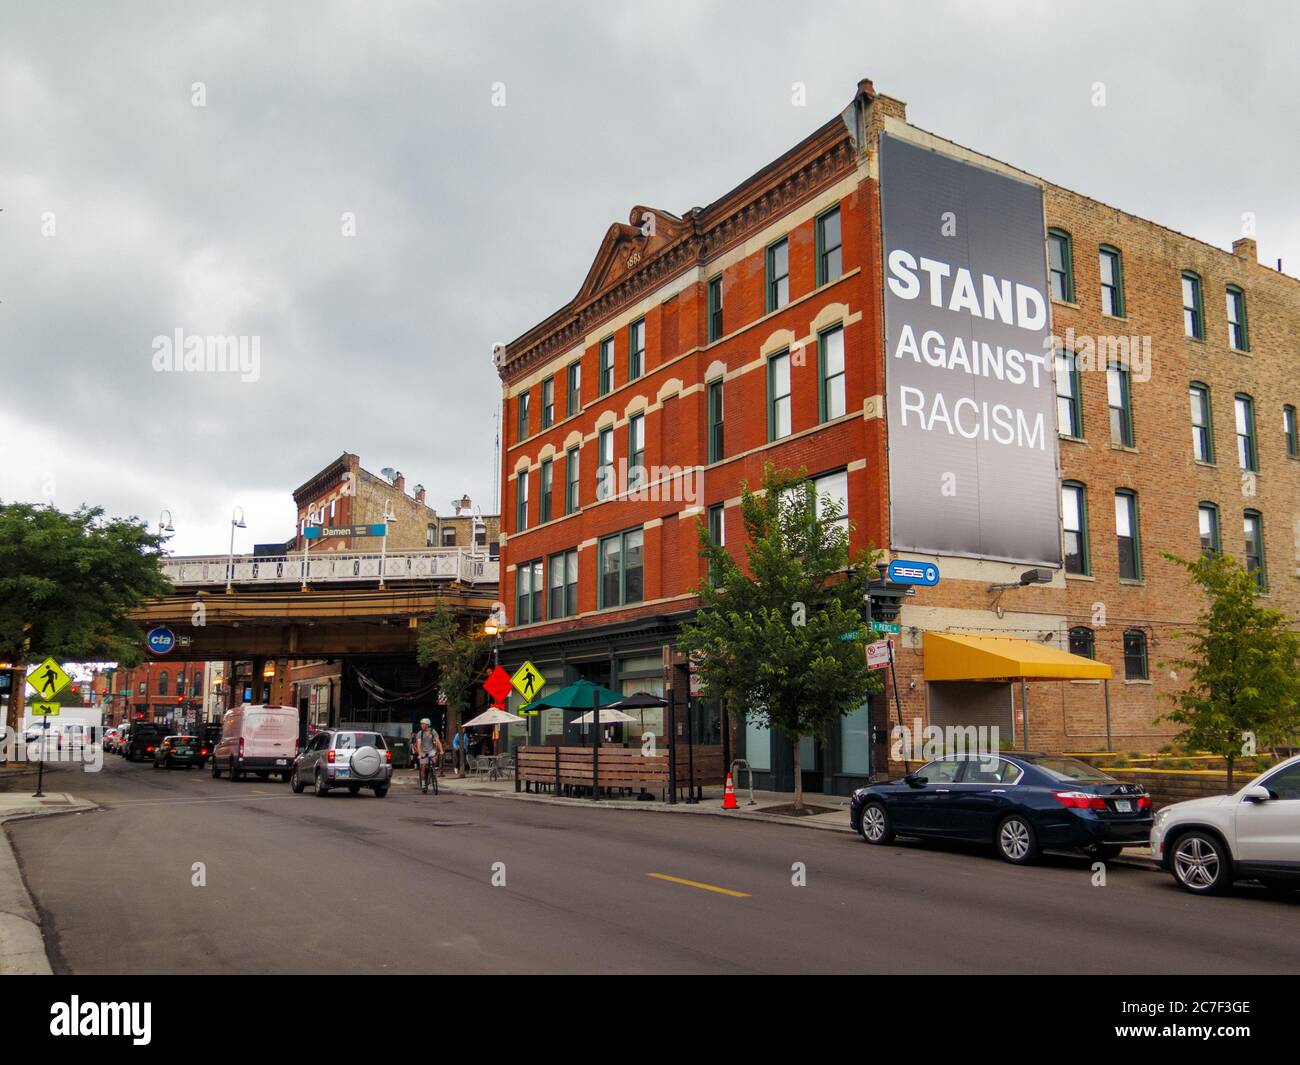 View north on Damen Avenue, Wicker Park neighborhood of Chicago. Stand against racism banner on building. Stock Photo